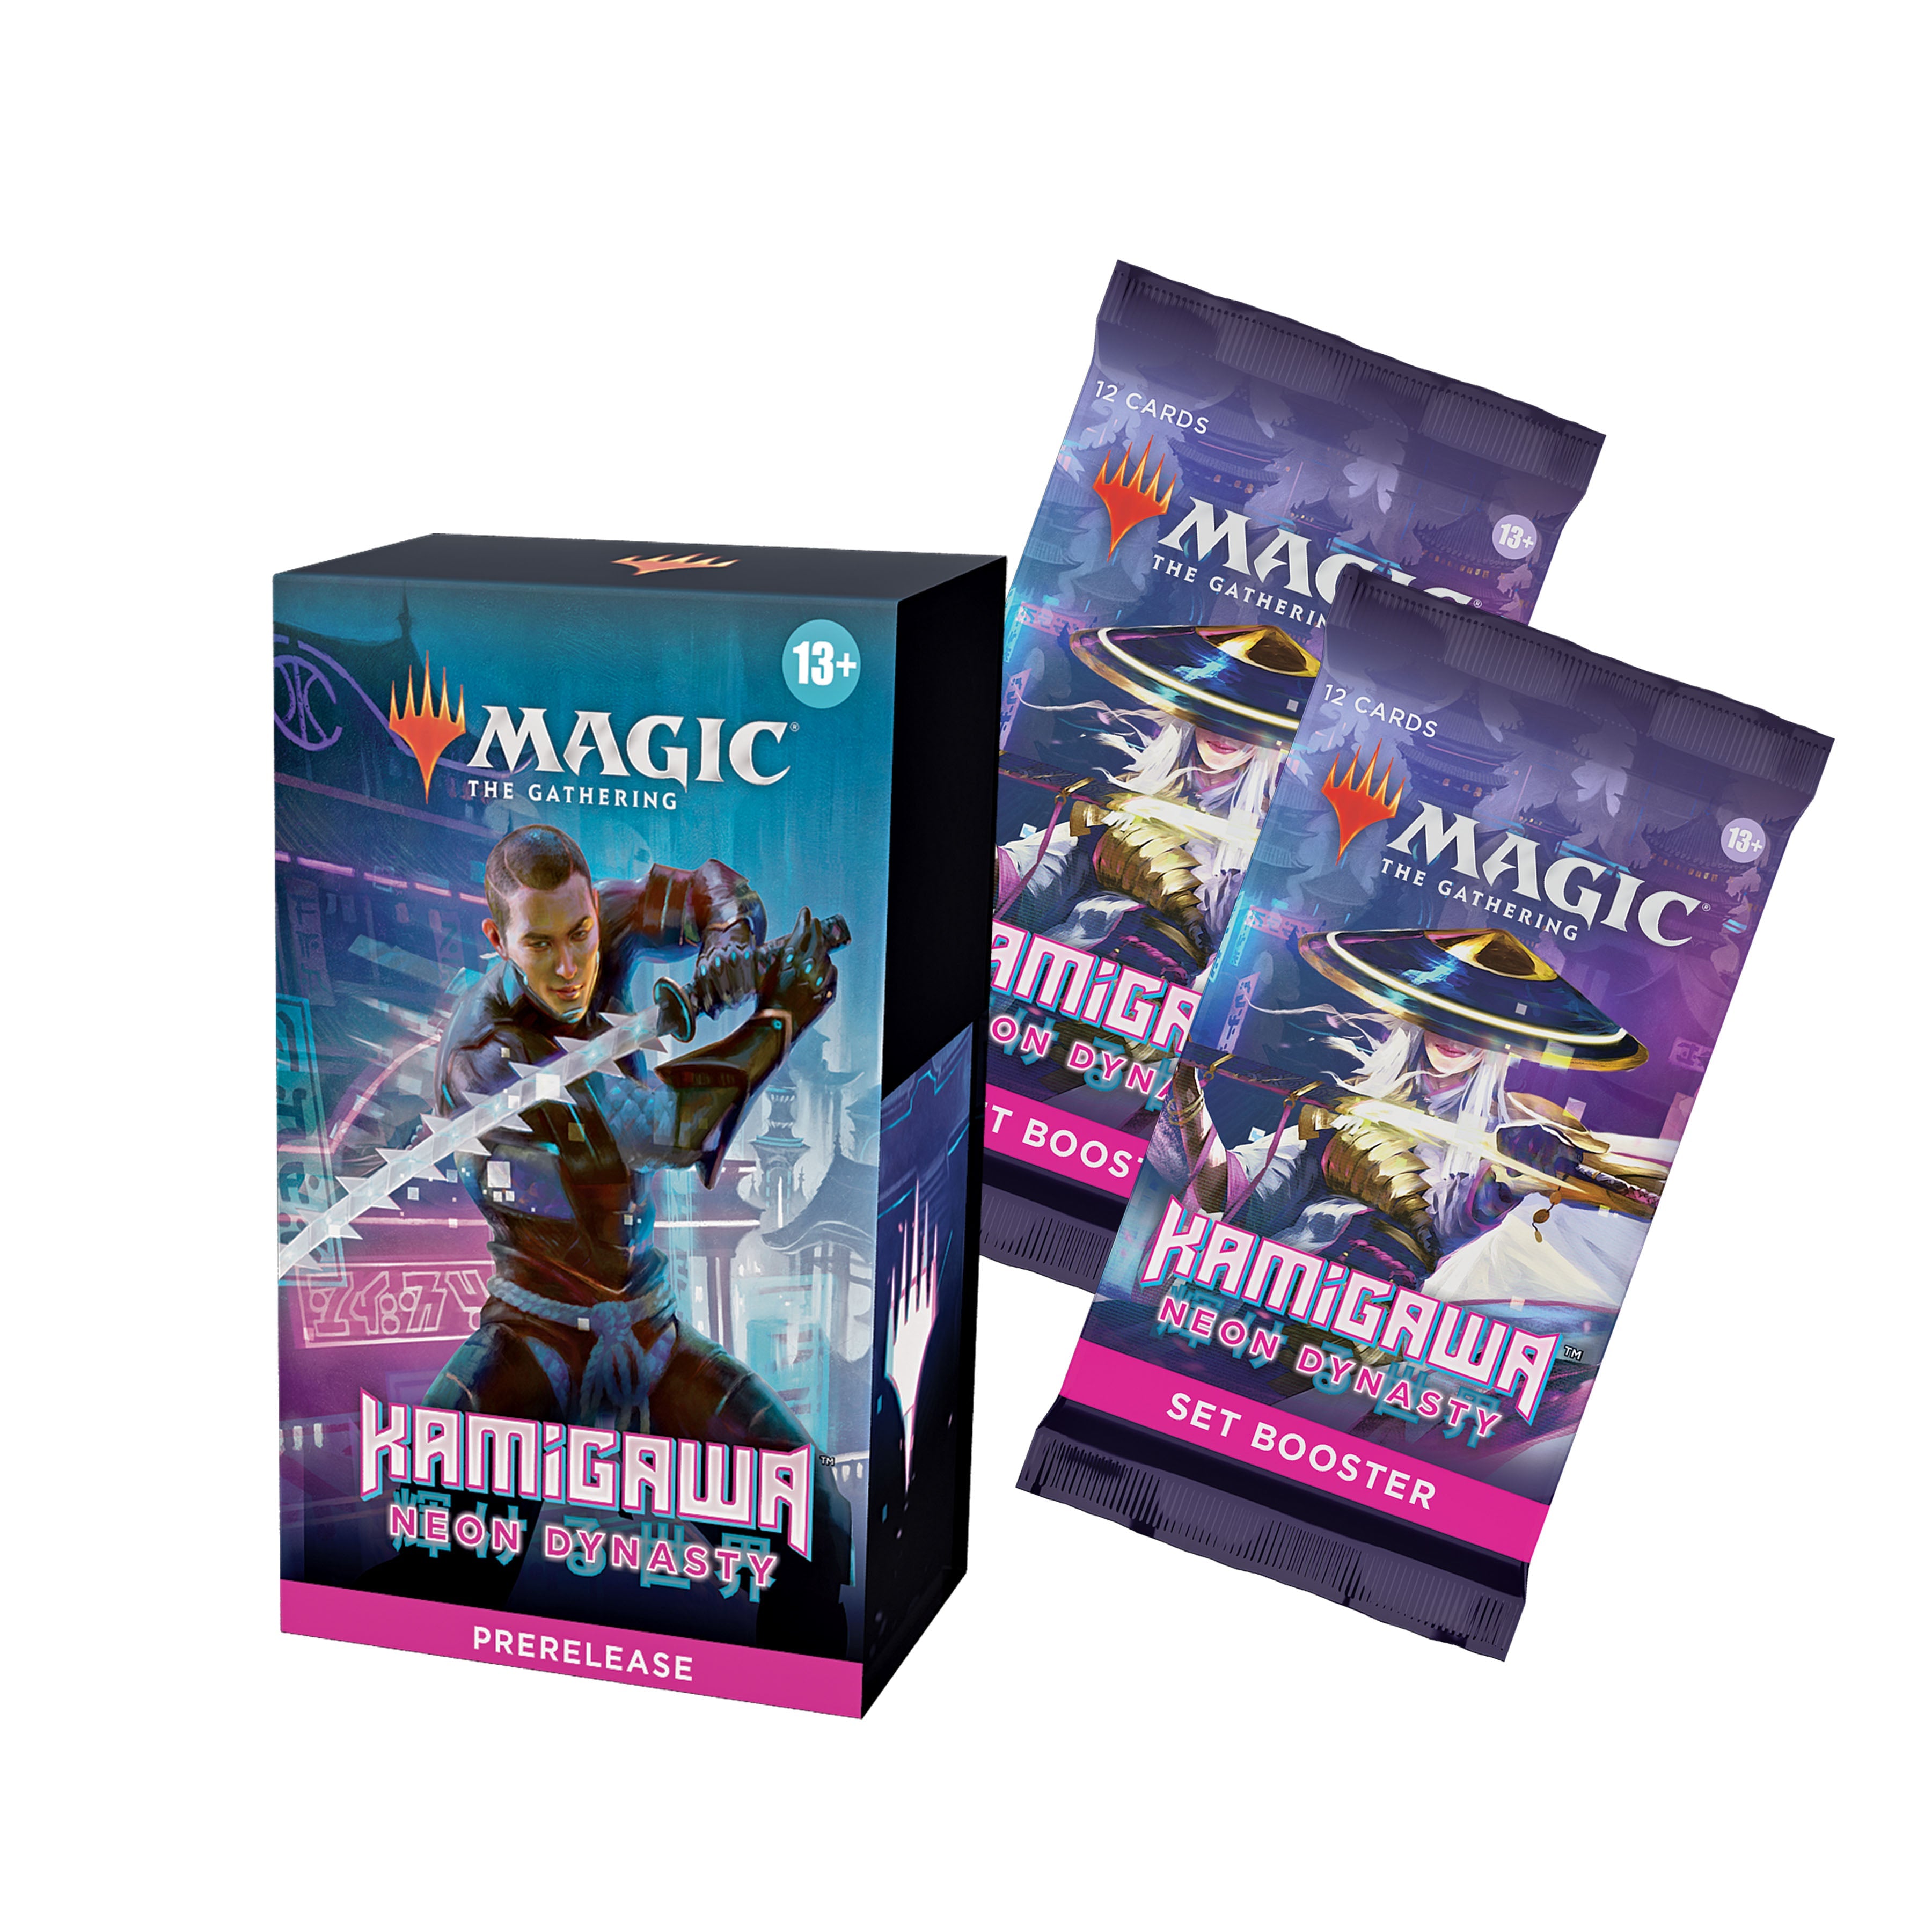 MTG Kamigawa: Neon Dynasty Prerelease at Home + 2 Bonus Booster Packs (Release Date: Feb 11, 2022) | The CG Realm